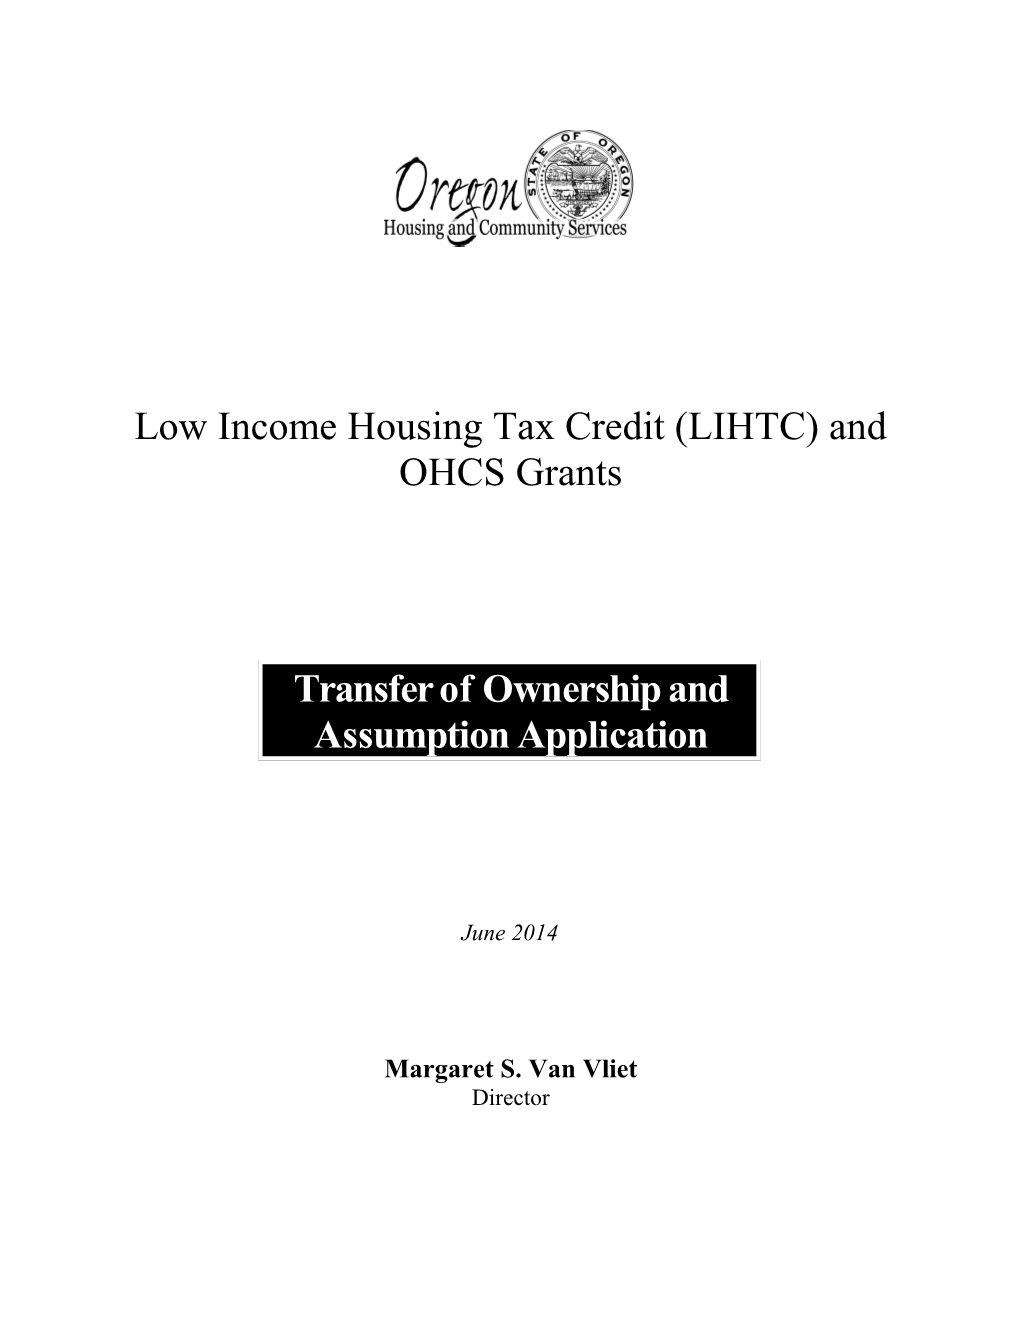 Application Form: Transfer of LIHTC Property Ownership and Assumption